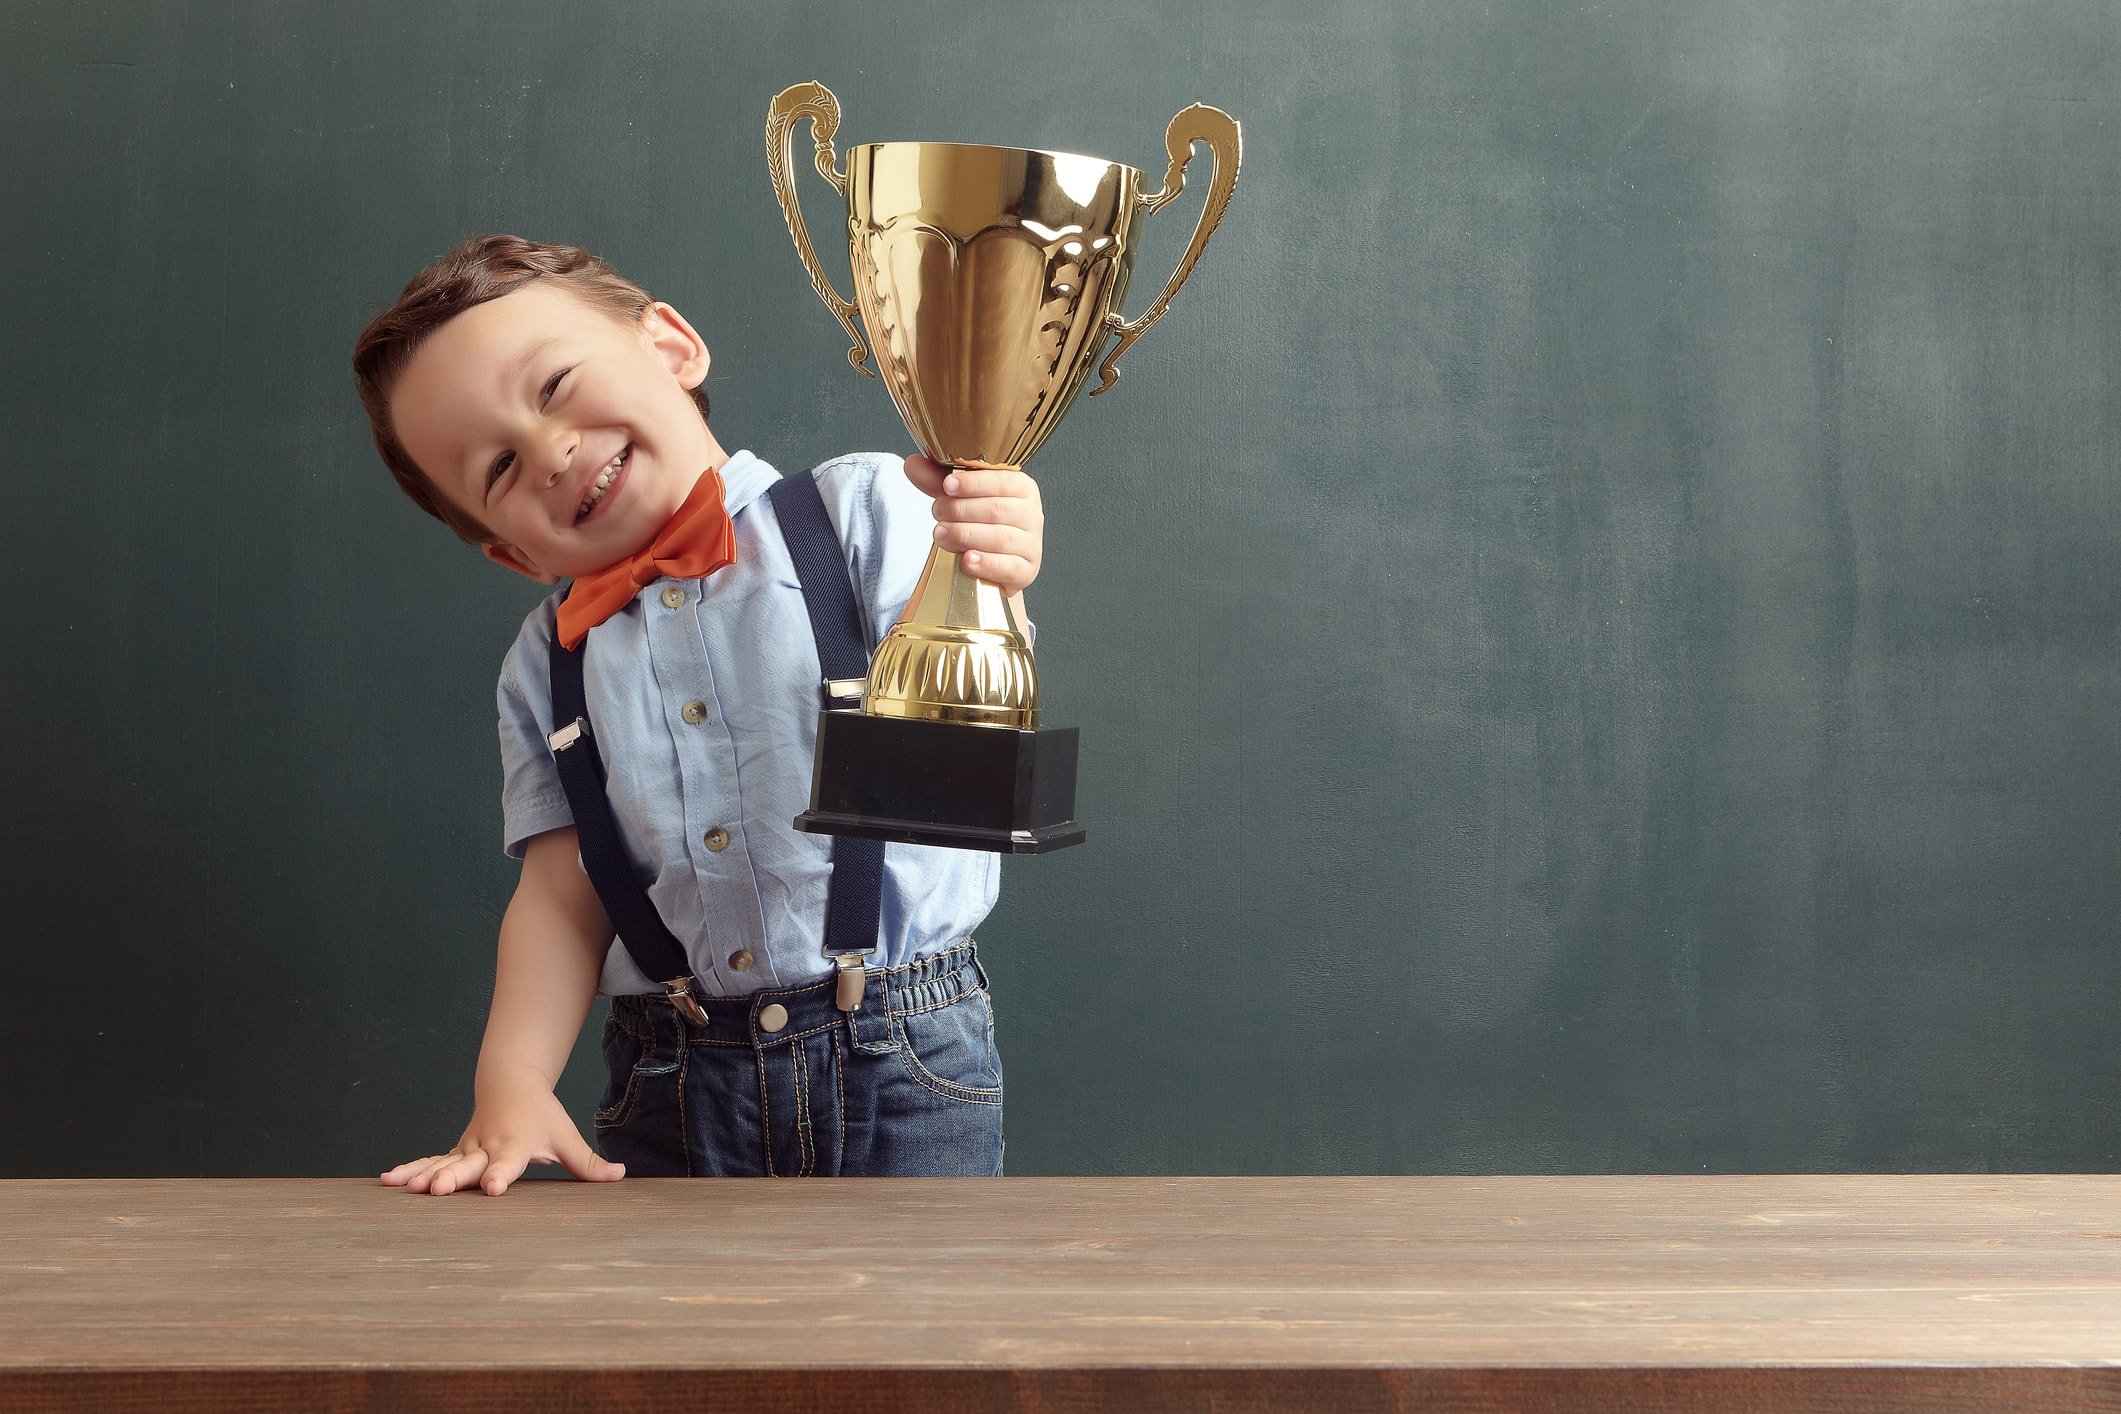 A cute, smiling 2-3 years old boy is standing behind a wooden table and raising a golden trophy with his hand. Little boy is wearing an orange bow tie and blue trousers with suspenders.